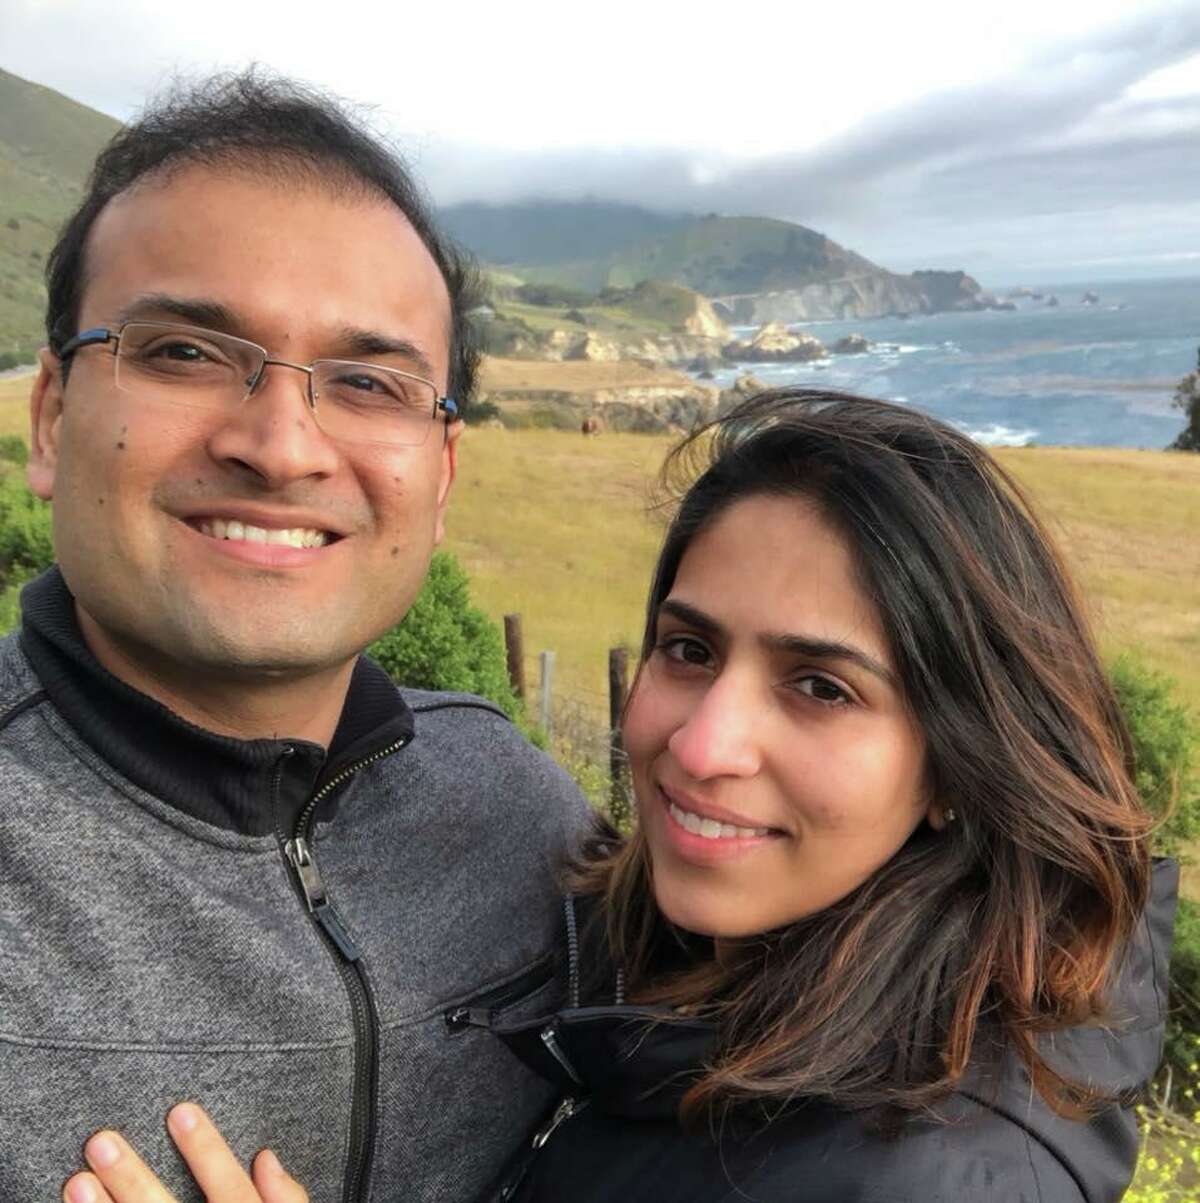 Kaustubh Nirmal and Sanjeeri Deopujari, of Stamford, died in the Conception boat fire in California on Sept. 2, 2019, according to relatives.